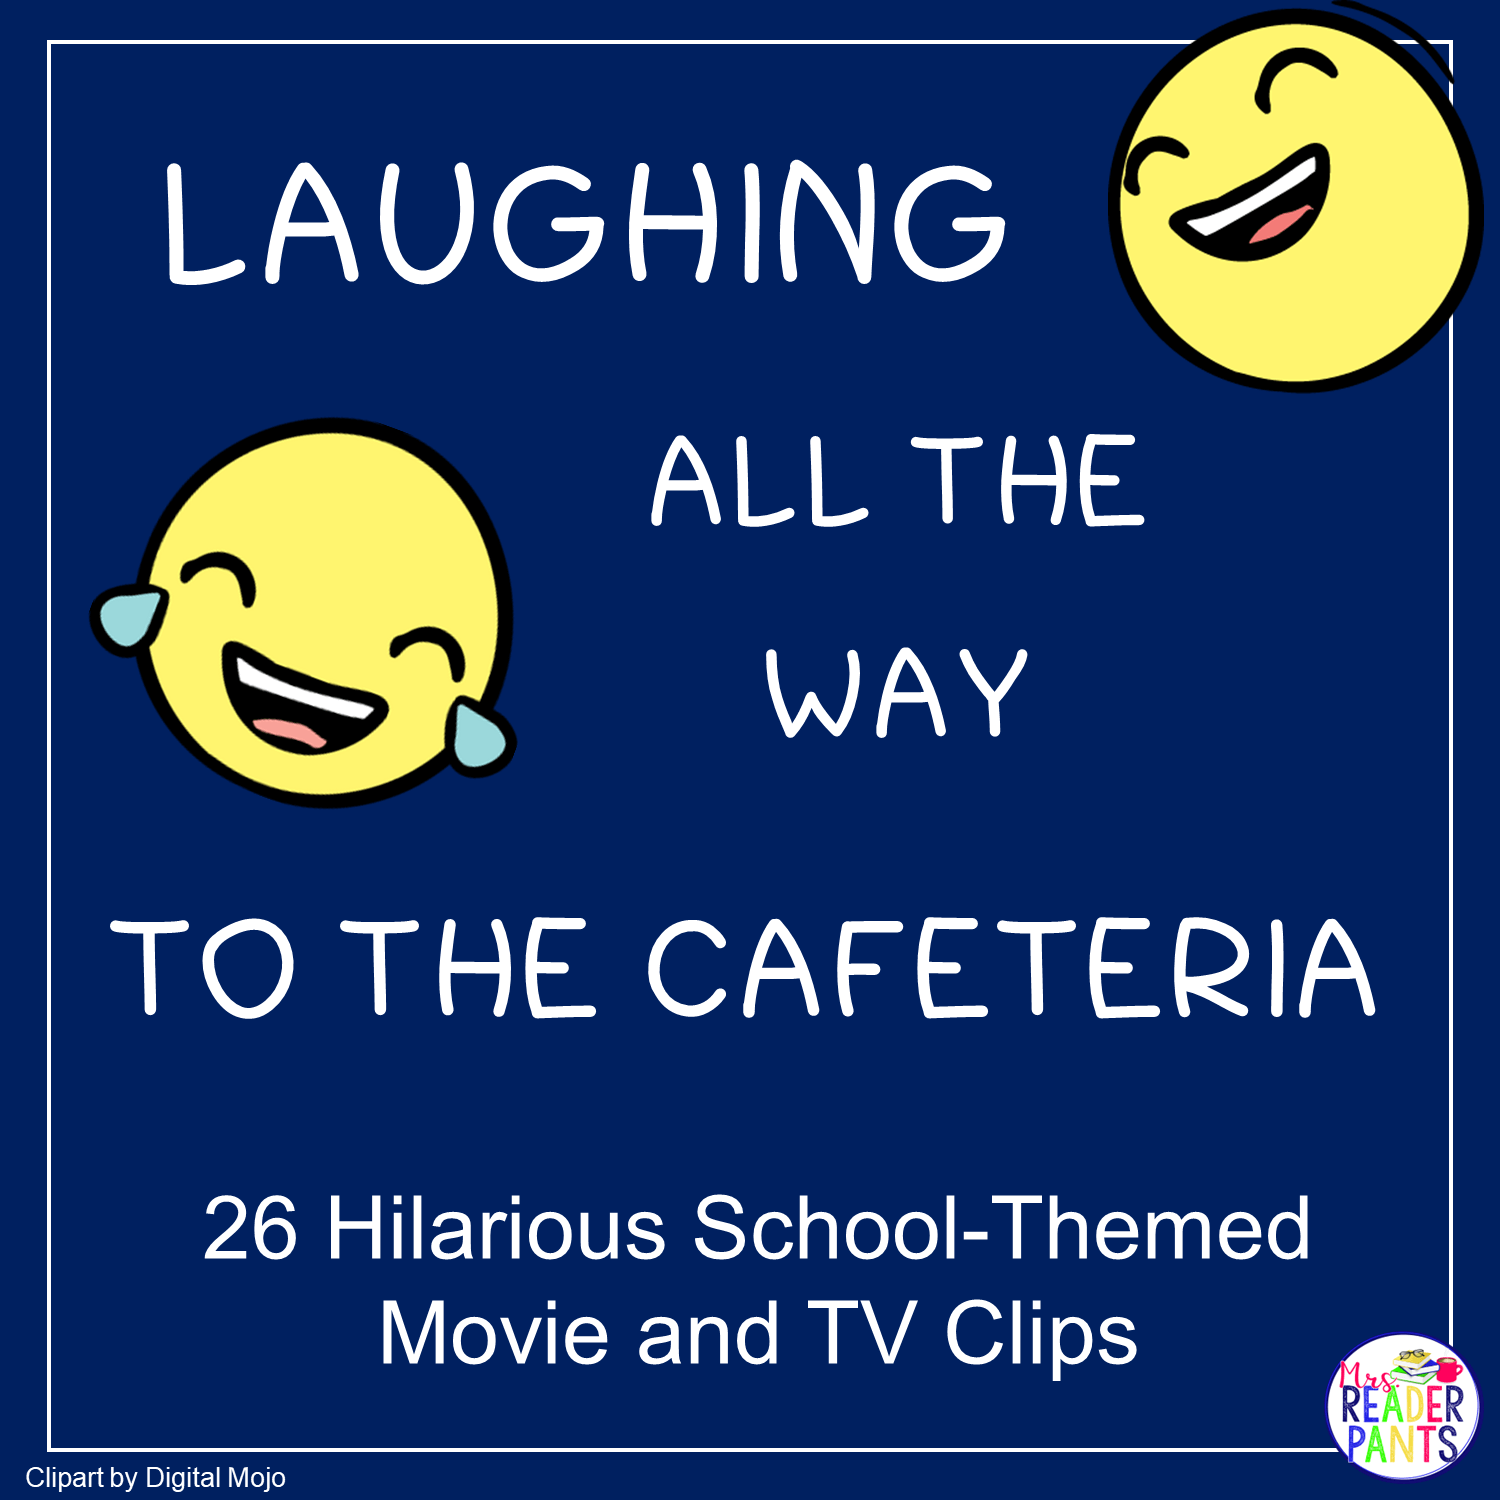 These back to school video clips will have you and your students laughing all the way to the cafeteria!